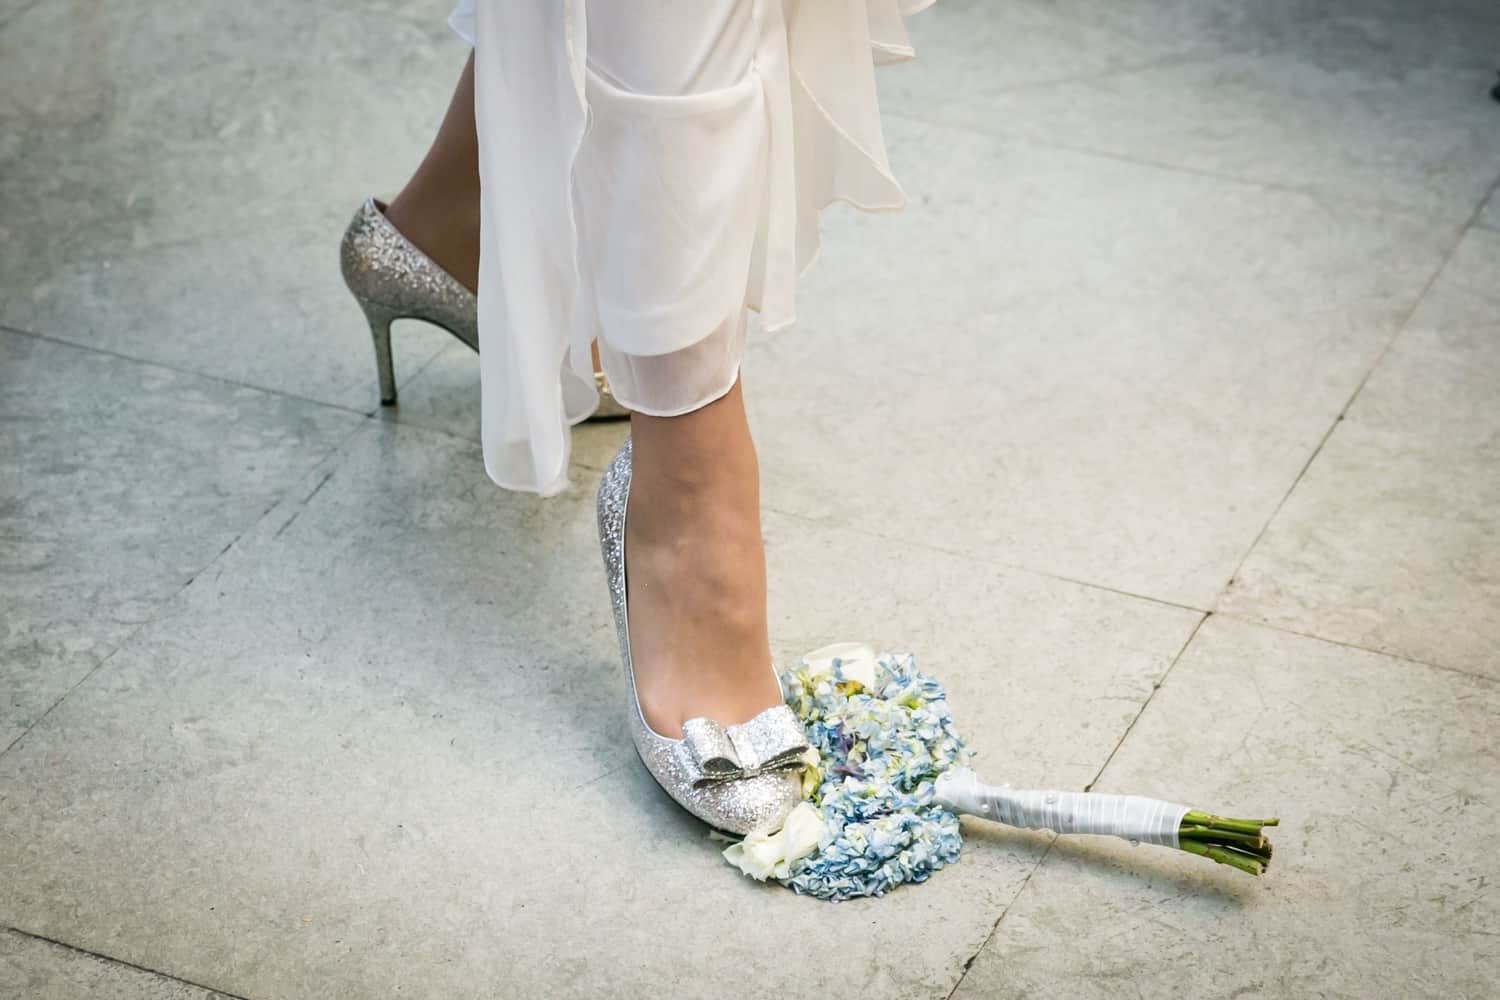 Close up of silver high heel stepping on blue and white bouquet